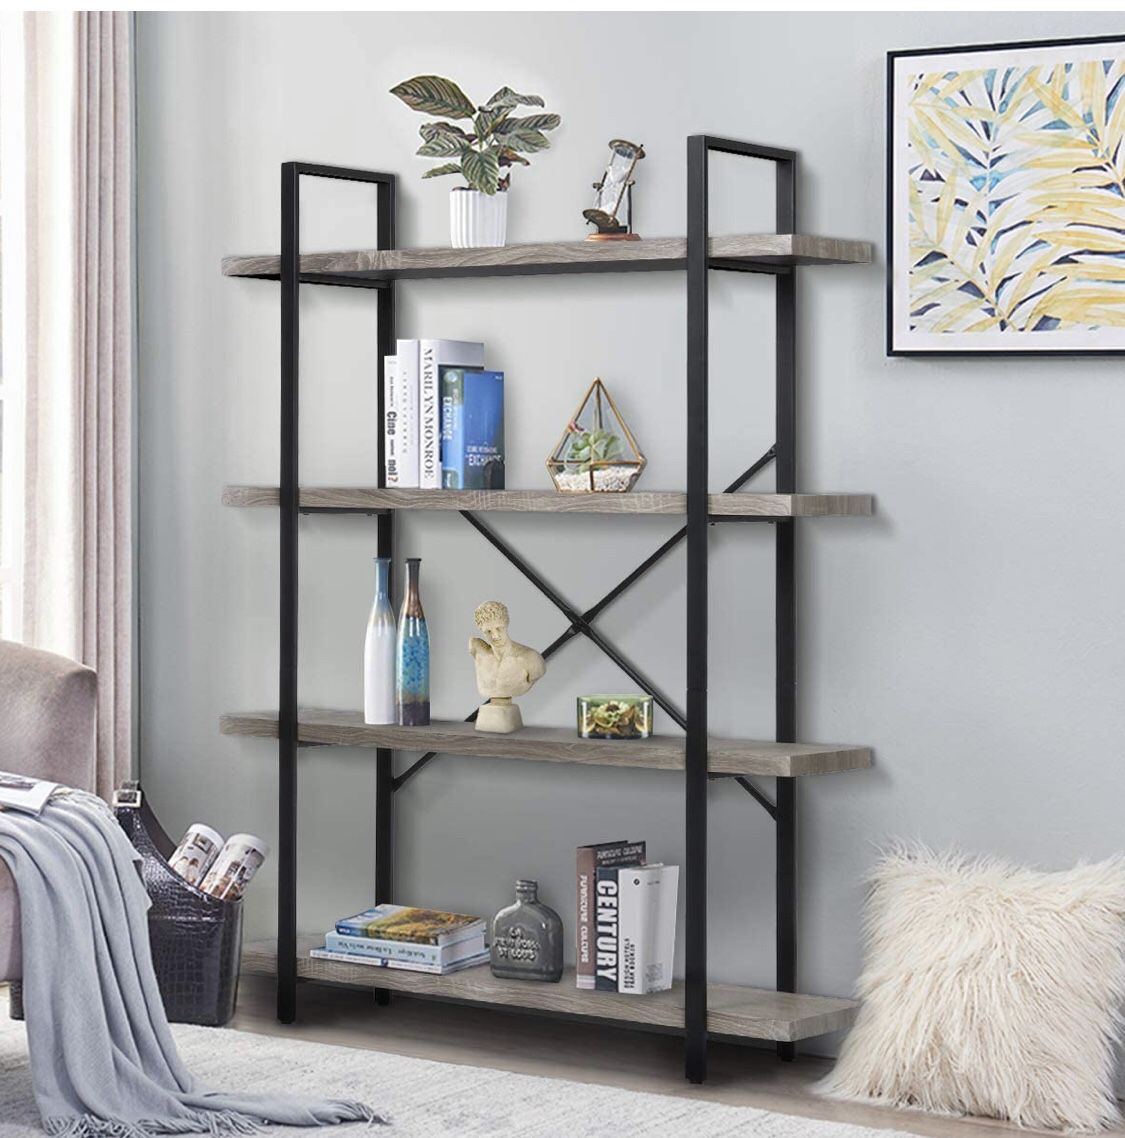 4-Tier, 130lbs/shelf Load Capacity, Industrial Bookshelves Storage Display Shelves, Home Office Furniture, Wood and Metal Frame( Gray